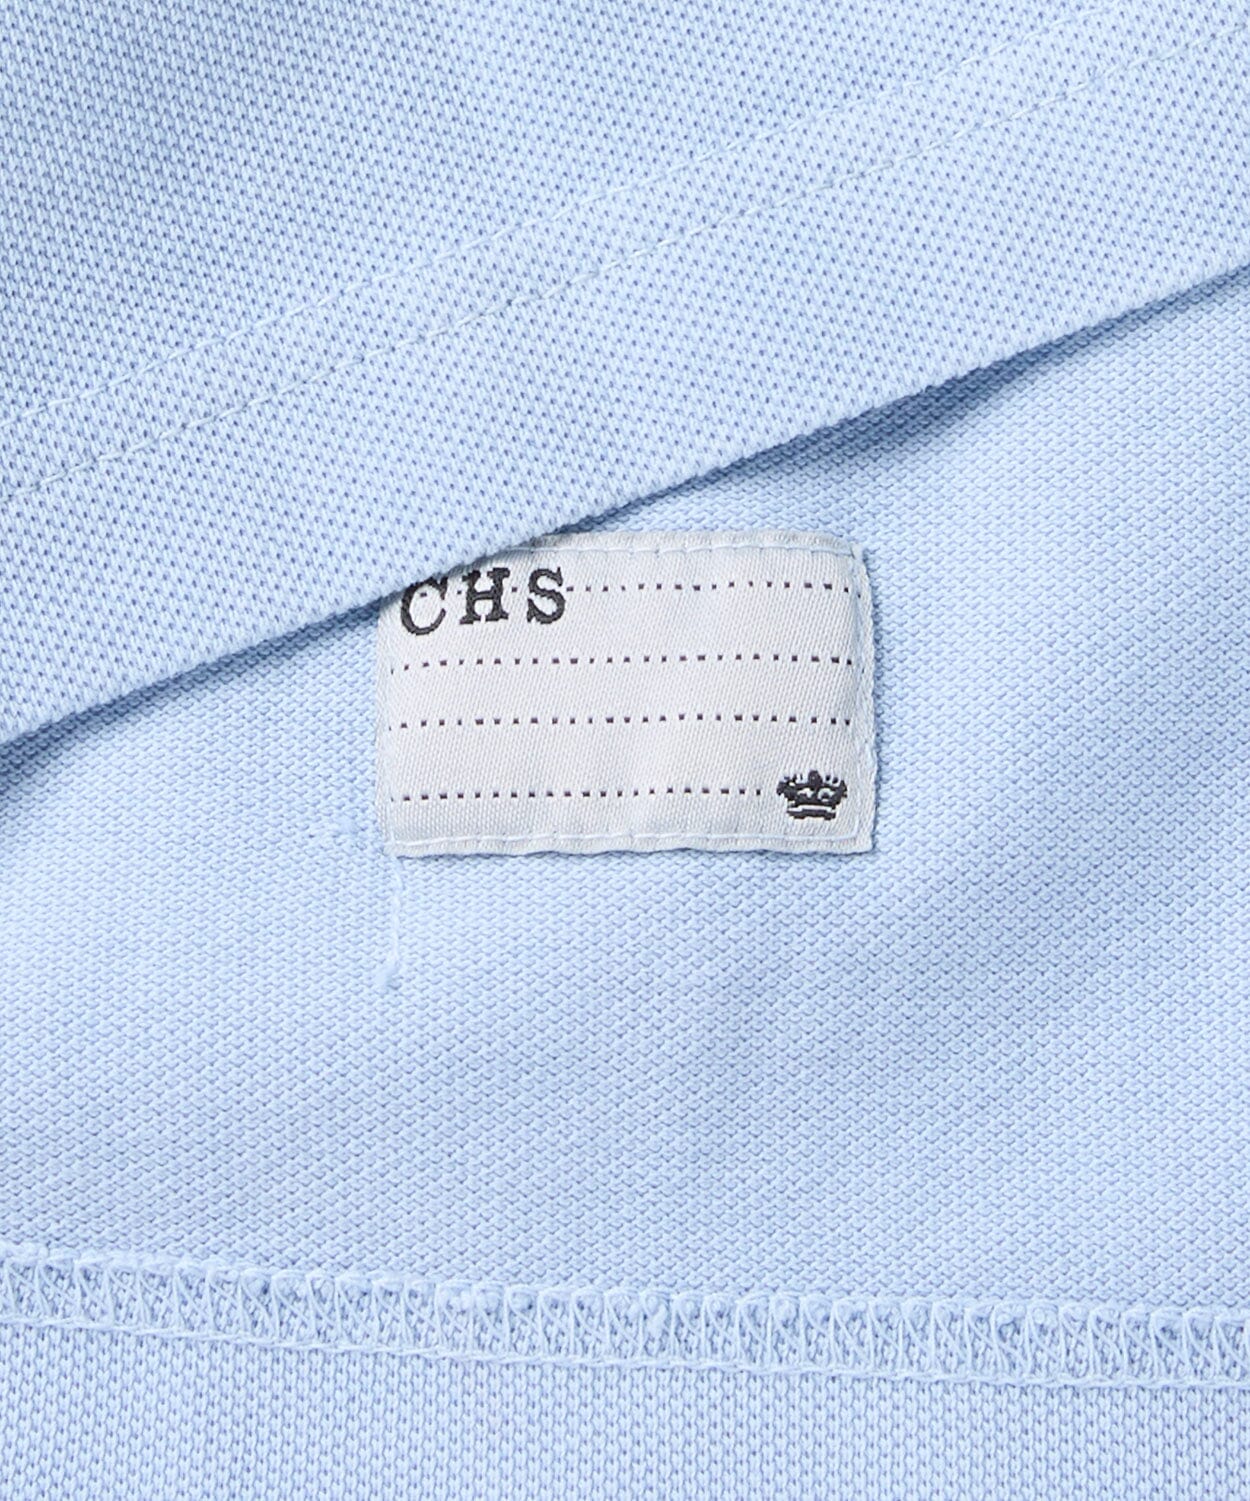 detail of a polo shirt